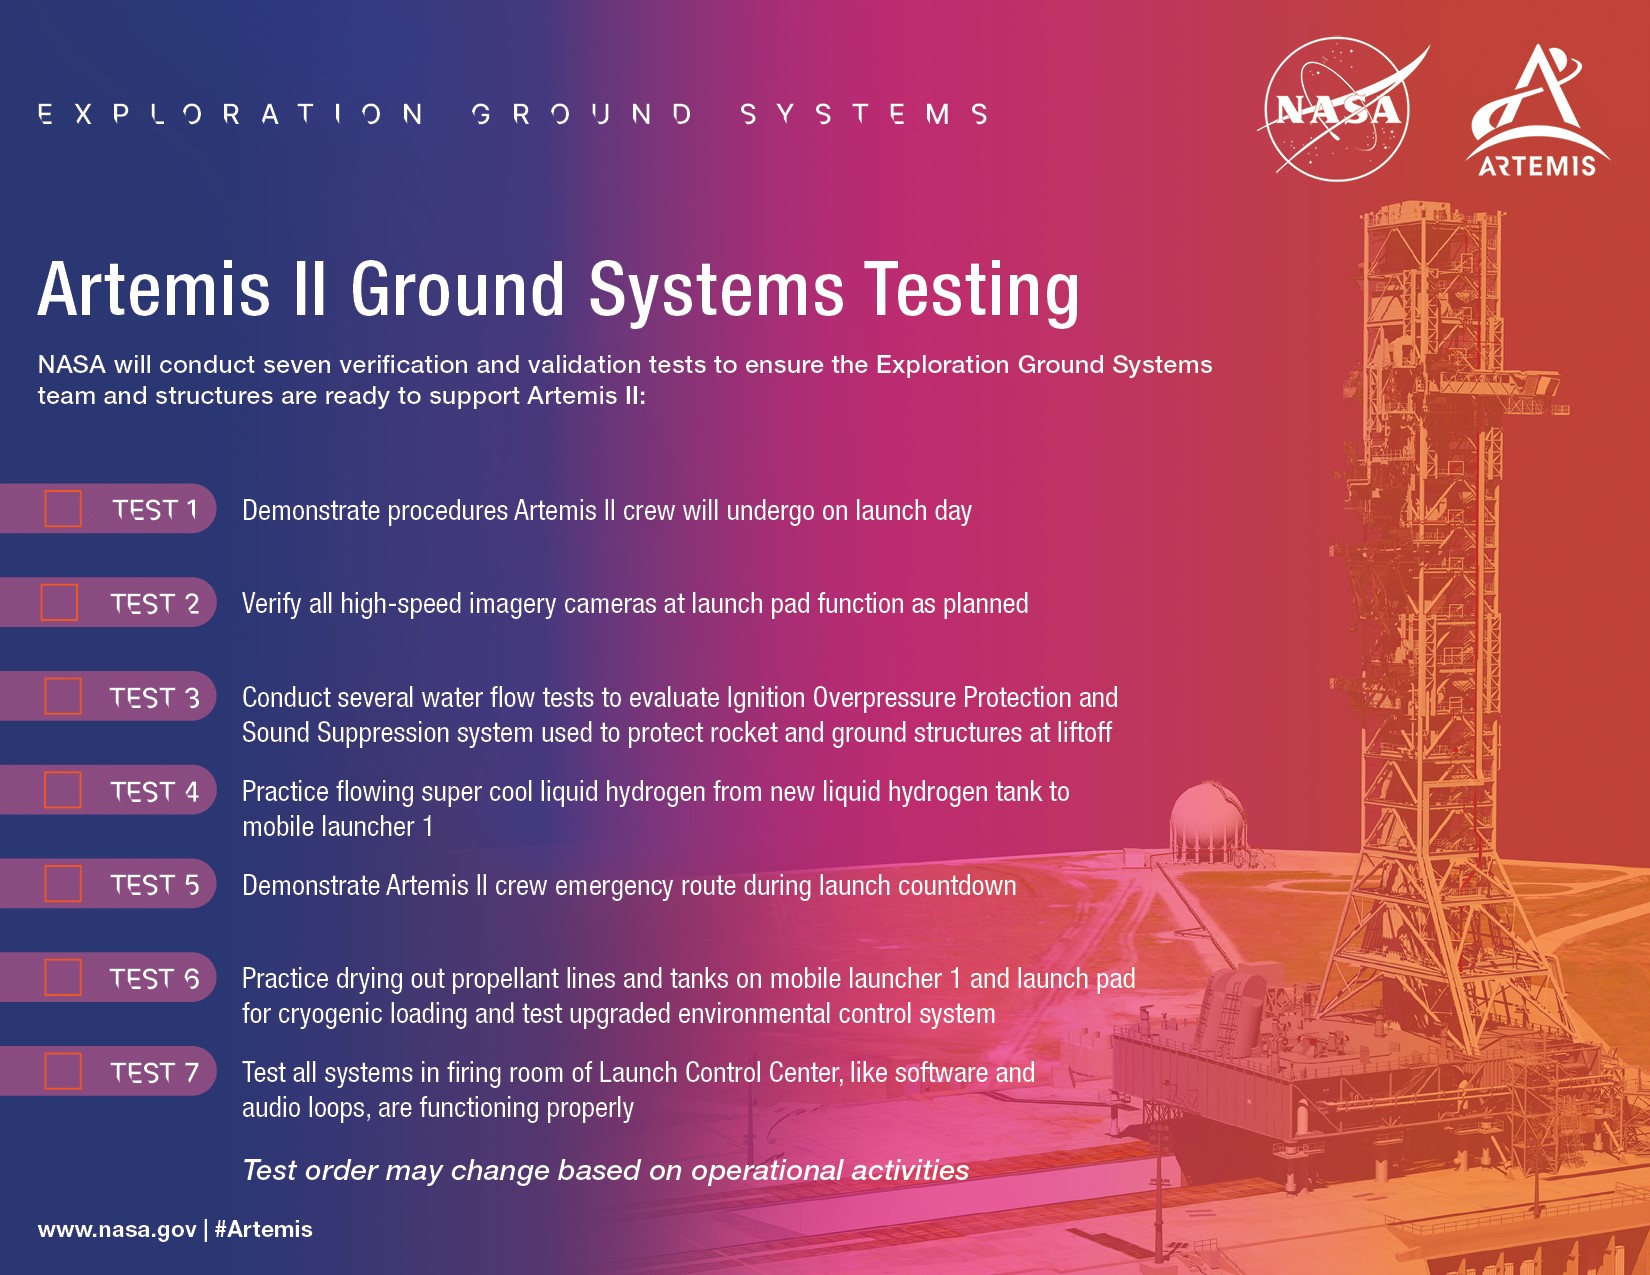 NASA will conduct seven verification and validation tests to ensure the Exploration Ground Systems team and structures are ready to support Artemis II.